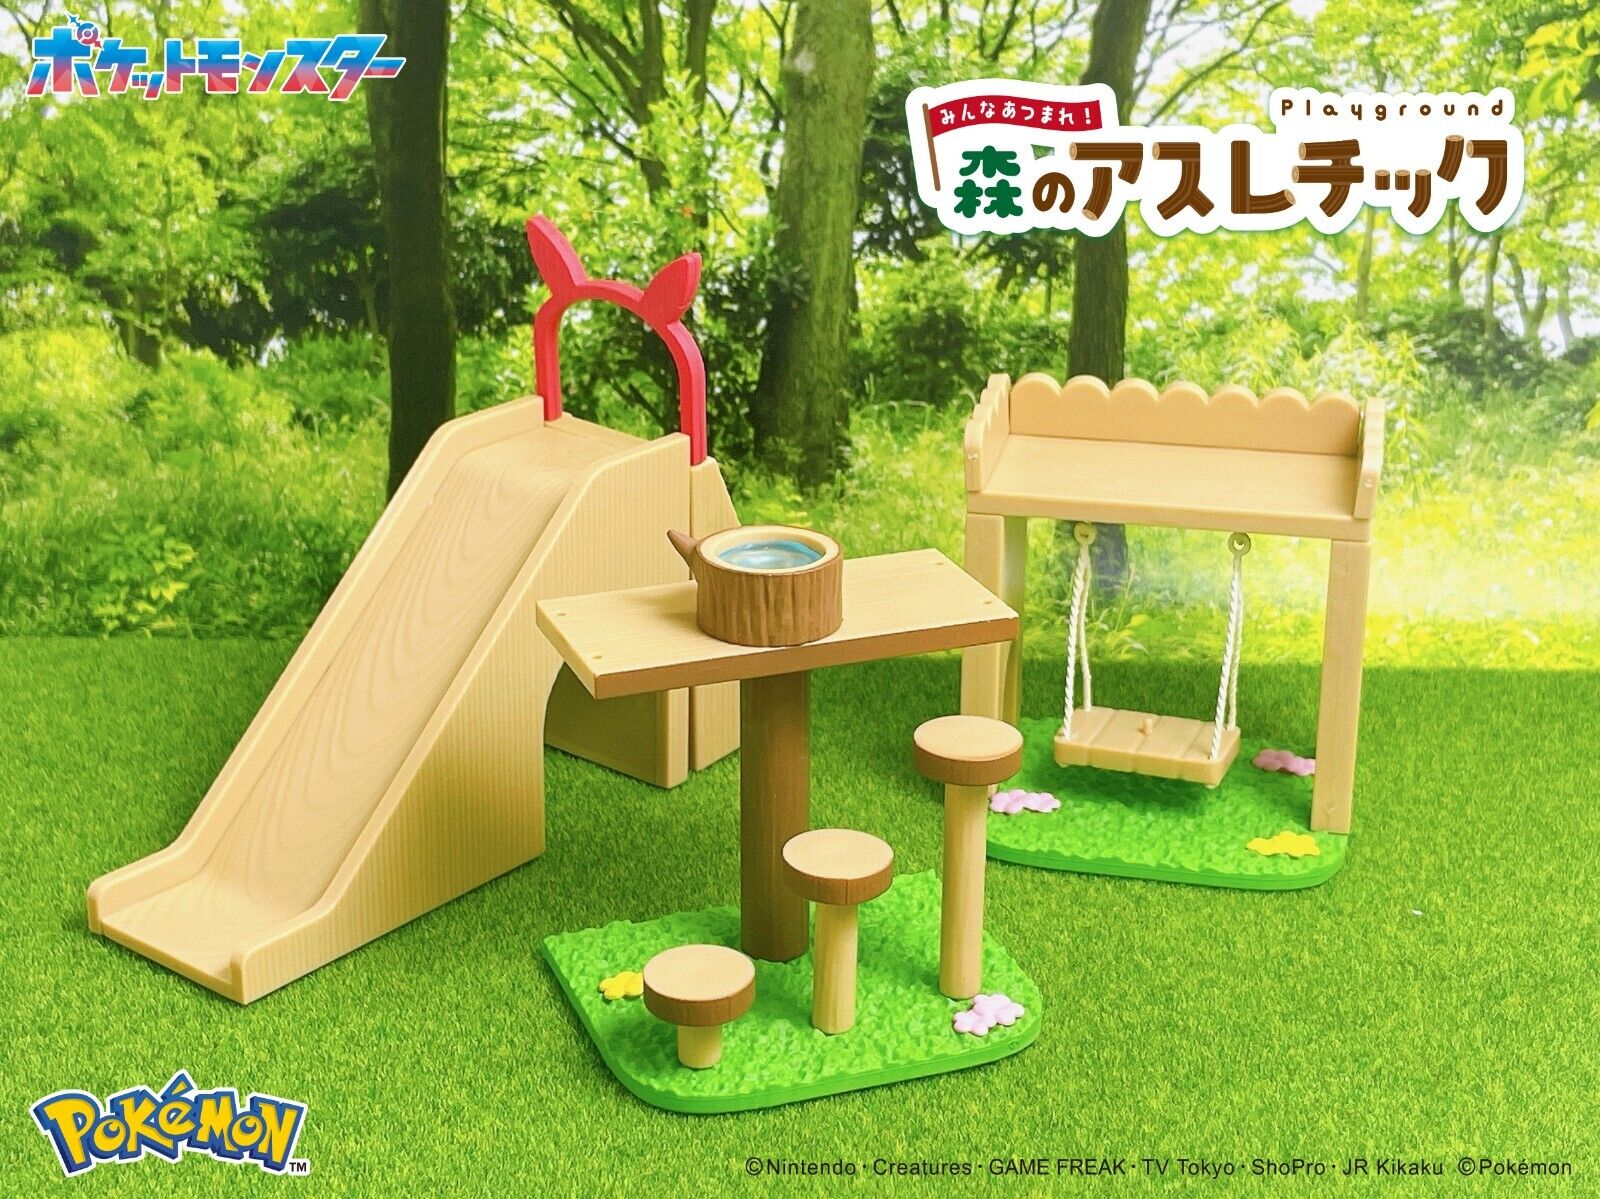 Re-ment Pokémon Gather Everyone Playground in the Forest Athletics